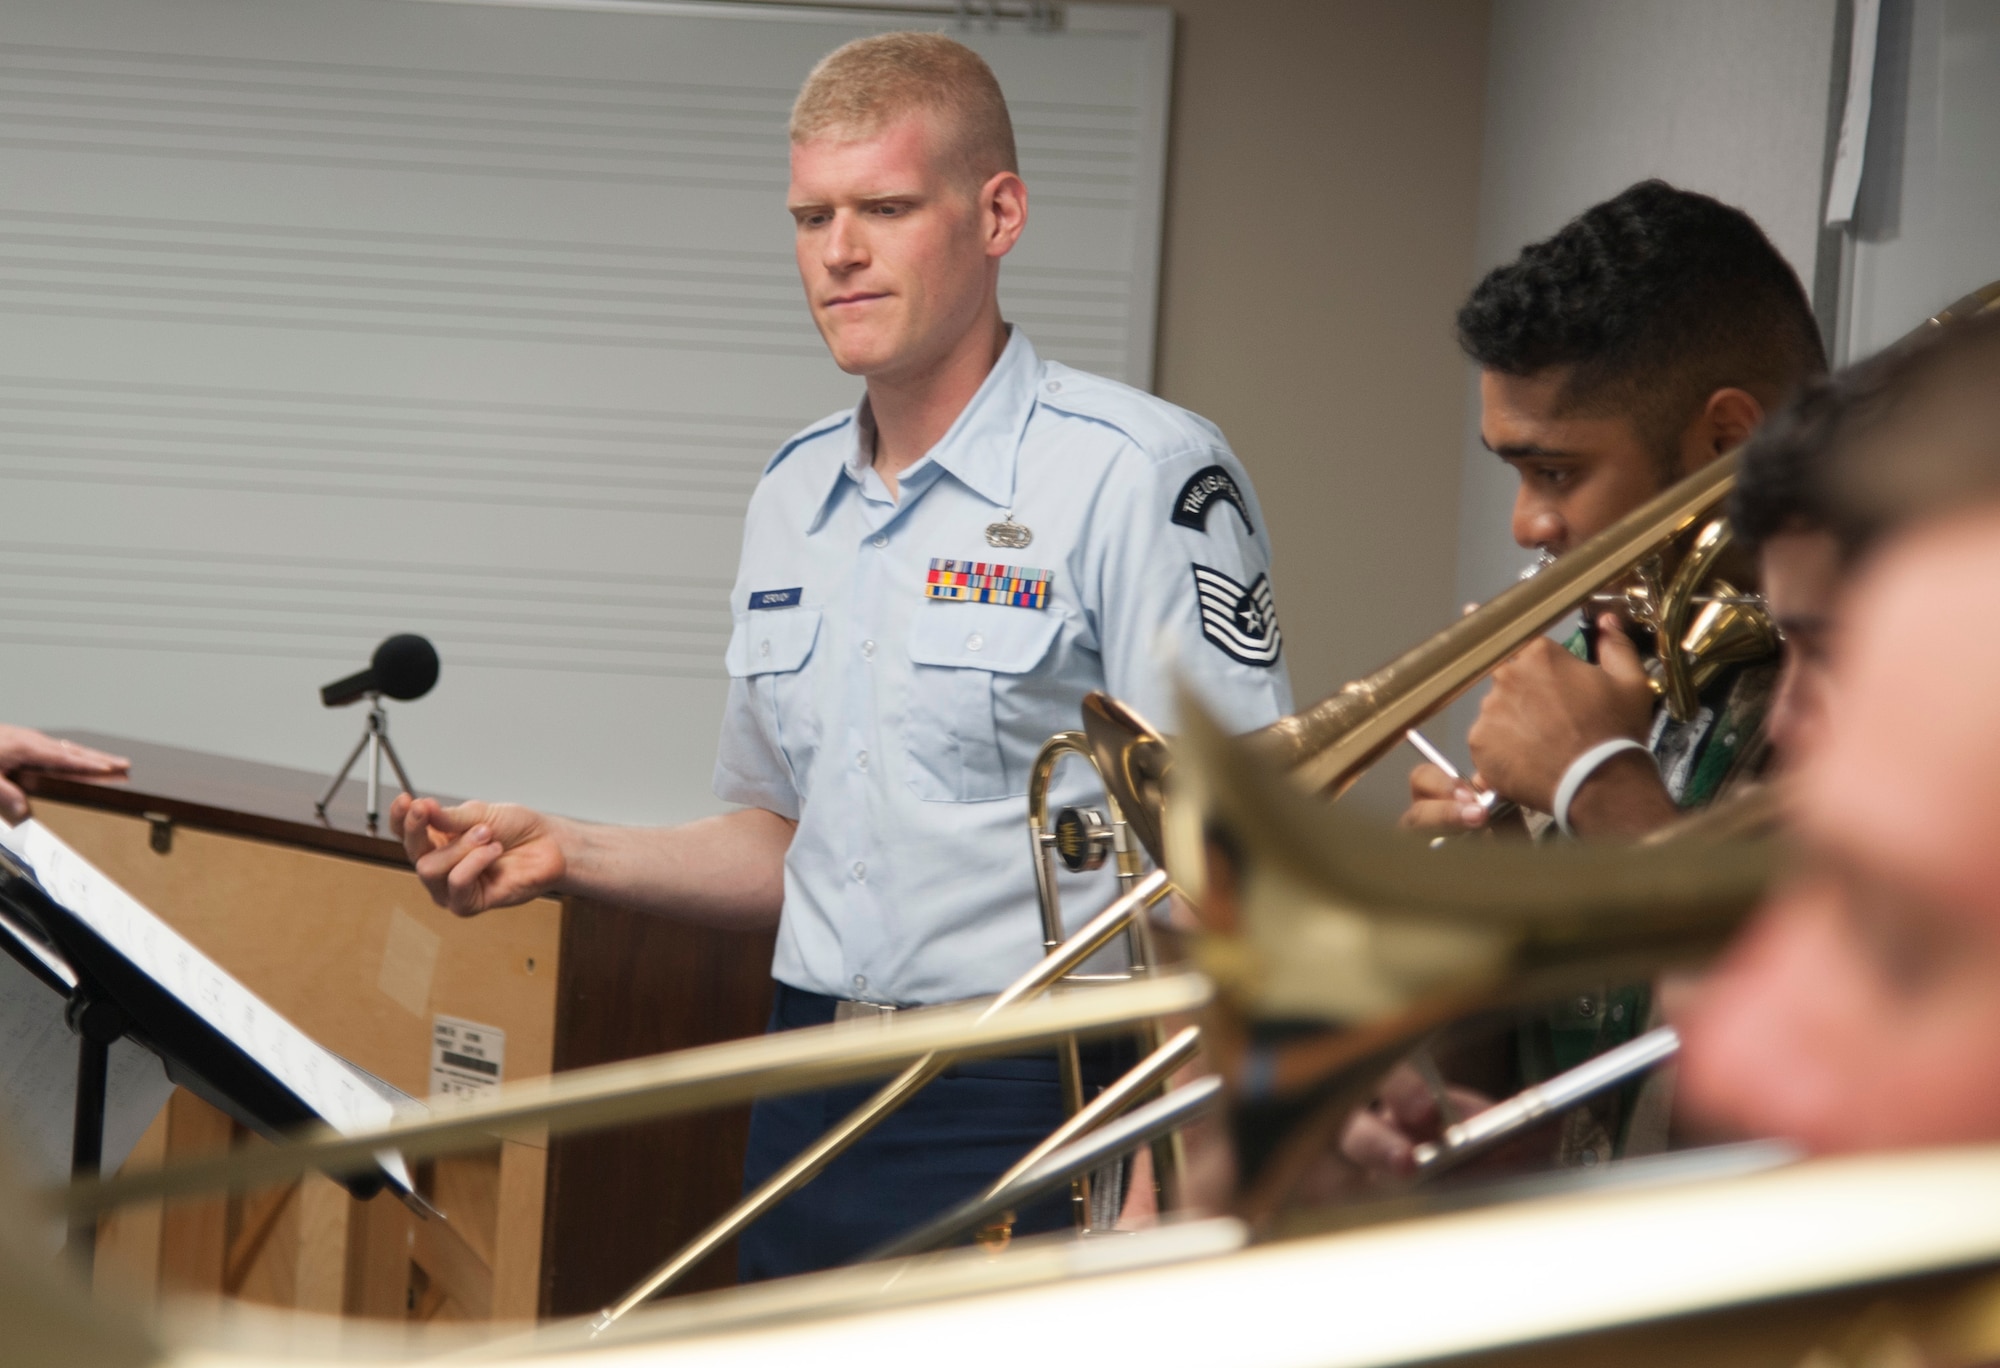 Trombone students from the Lamar University Jazz Band perform under the watchful eye of Tech. Sgt. Kevin Cerovich, a trombone player for The Airmen of Note, the Air Force’s premiere jazz ensemble, during an Advancing Innovation through Music Outreach April 25 at Lamar University in Beaumont, Texas. (U.S. Air Force photo by Tech. Sgt. James Bolinger)